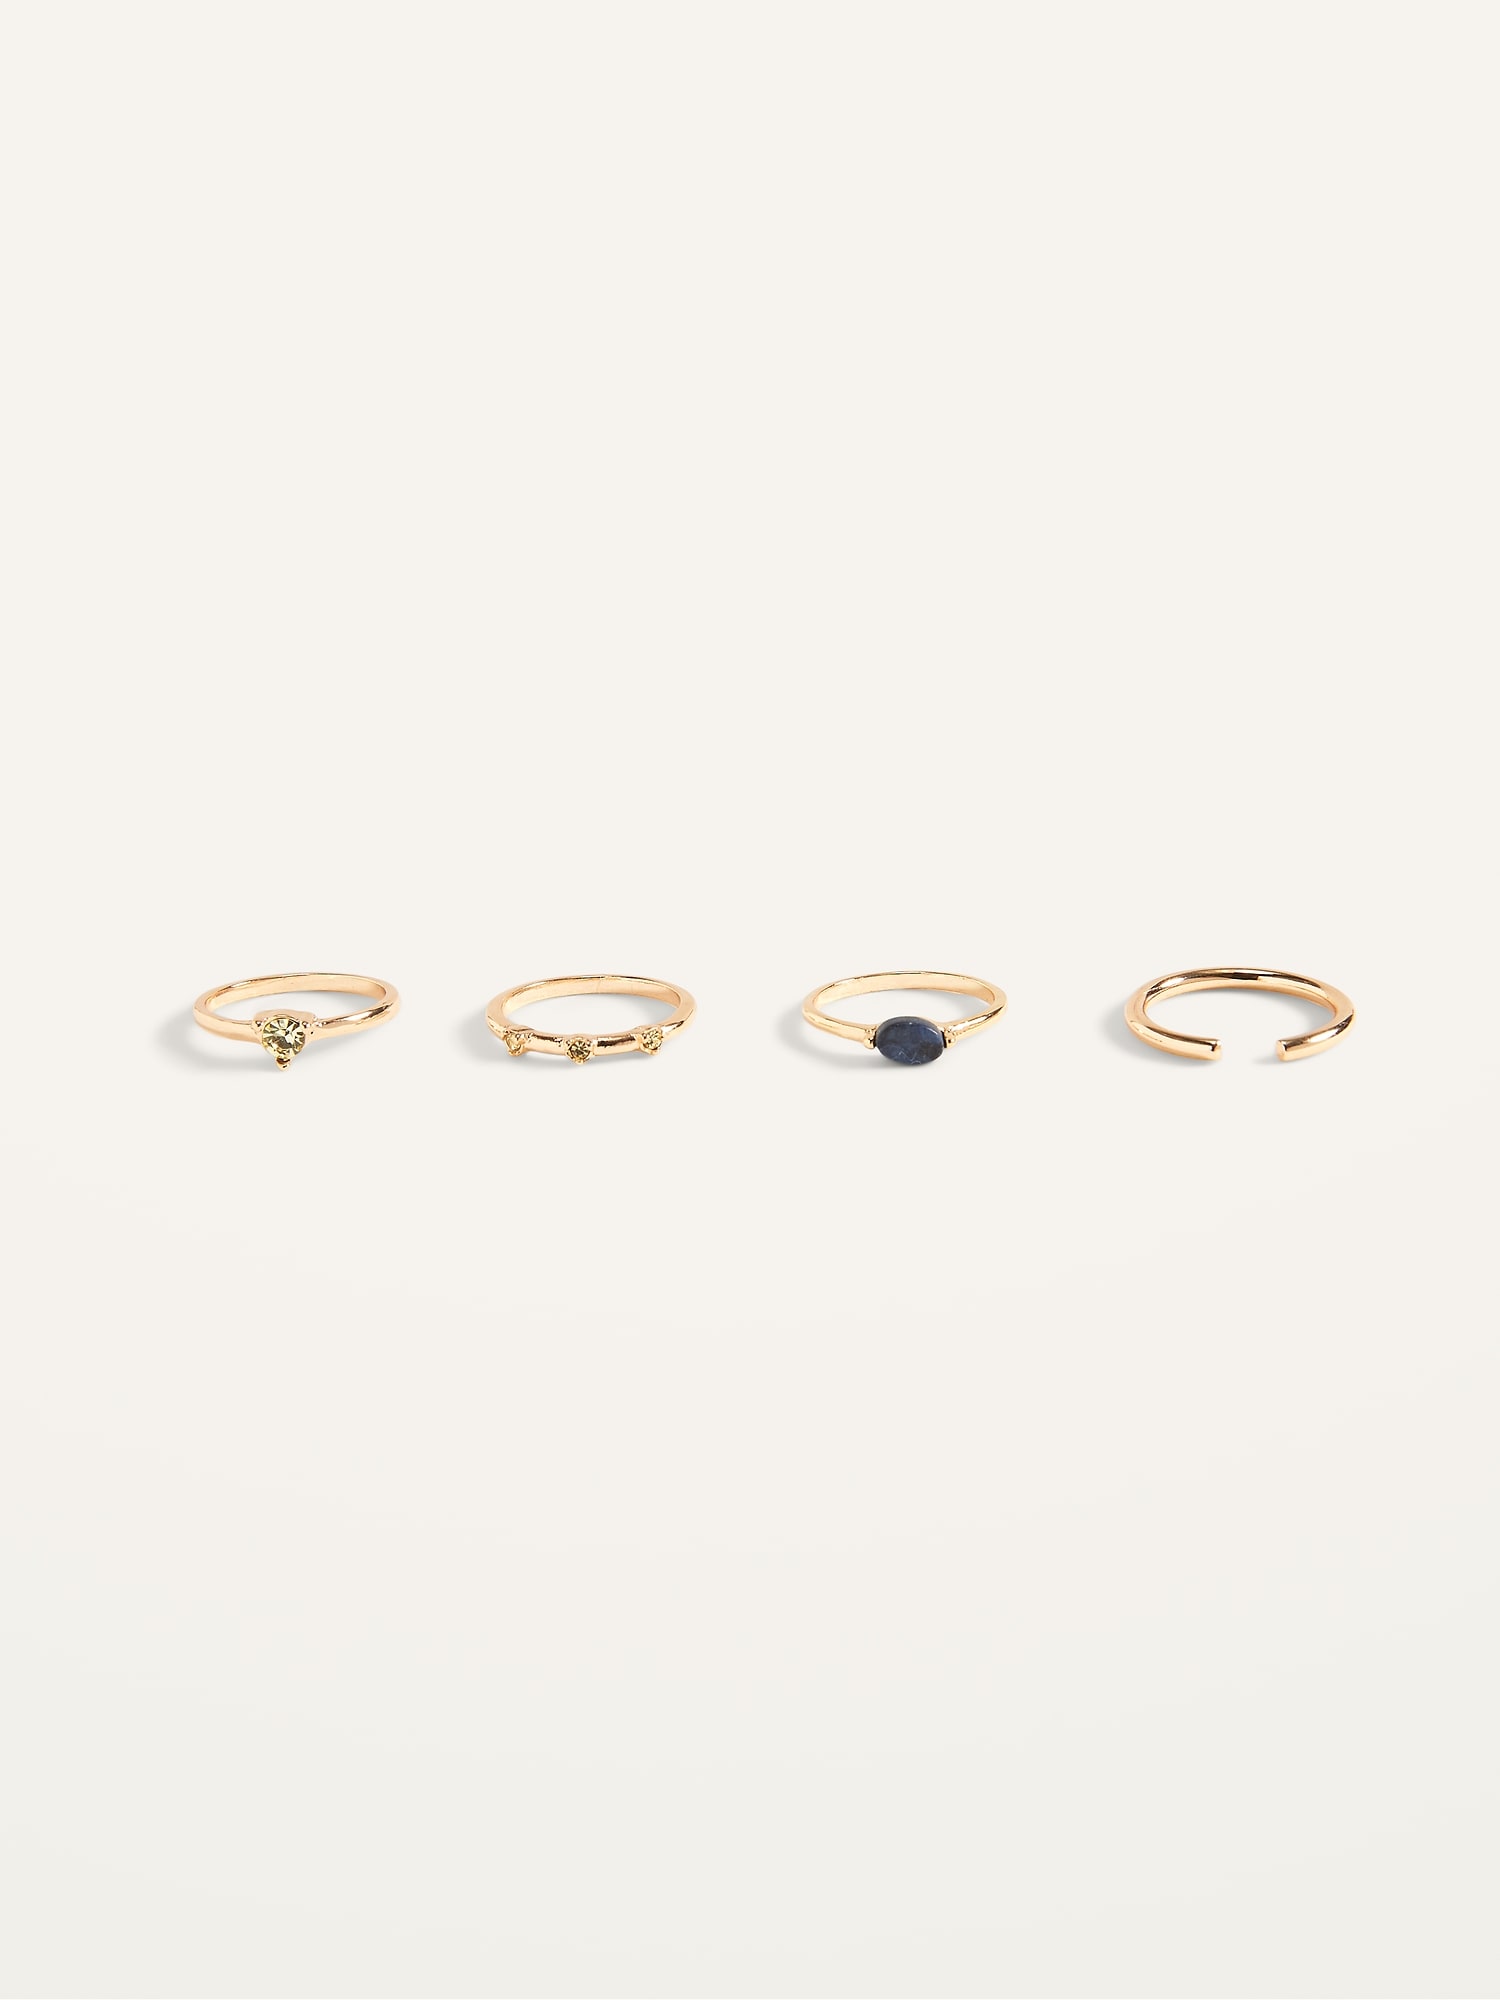 Gold-Toned Rings Variety 4-Pack for Women